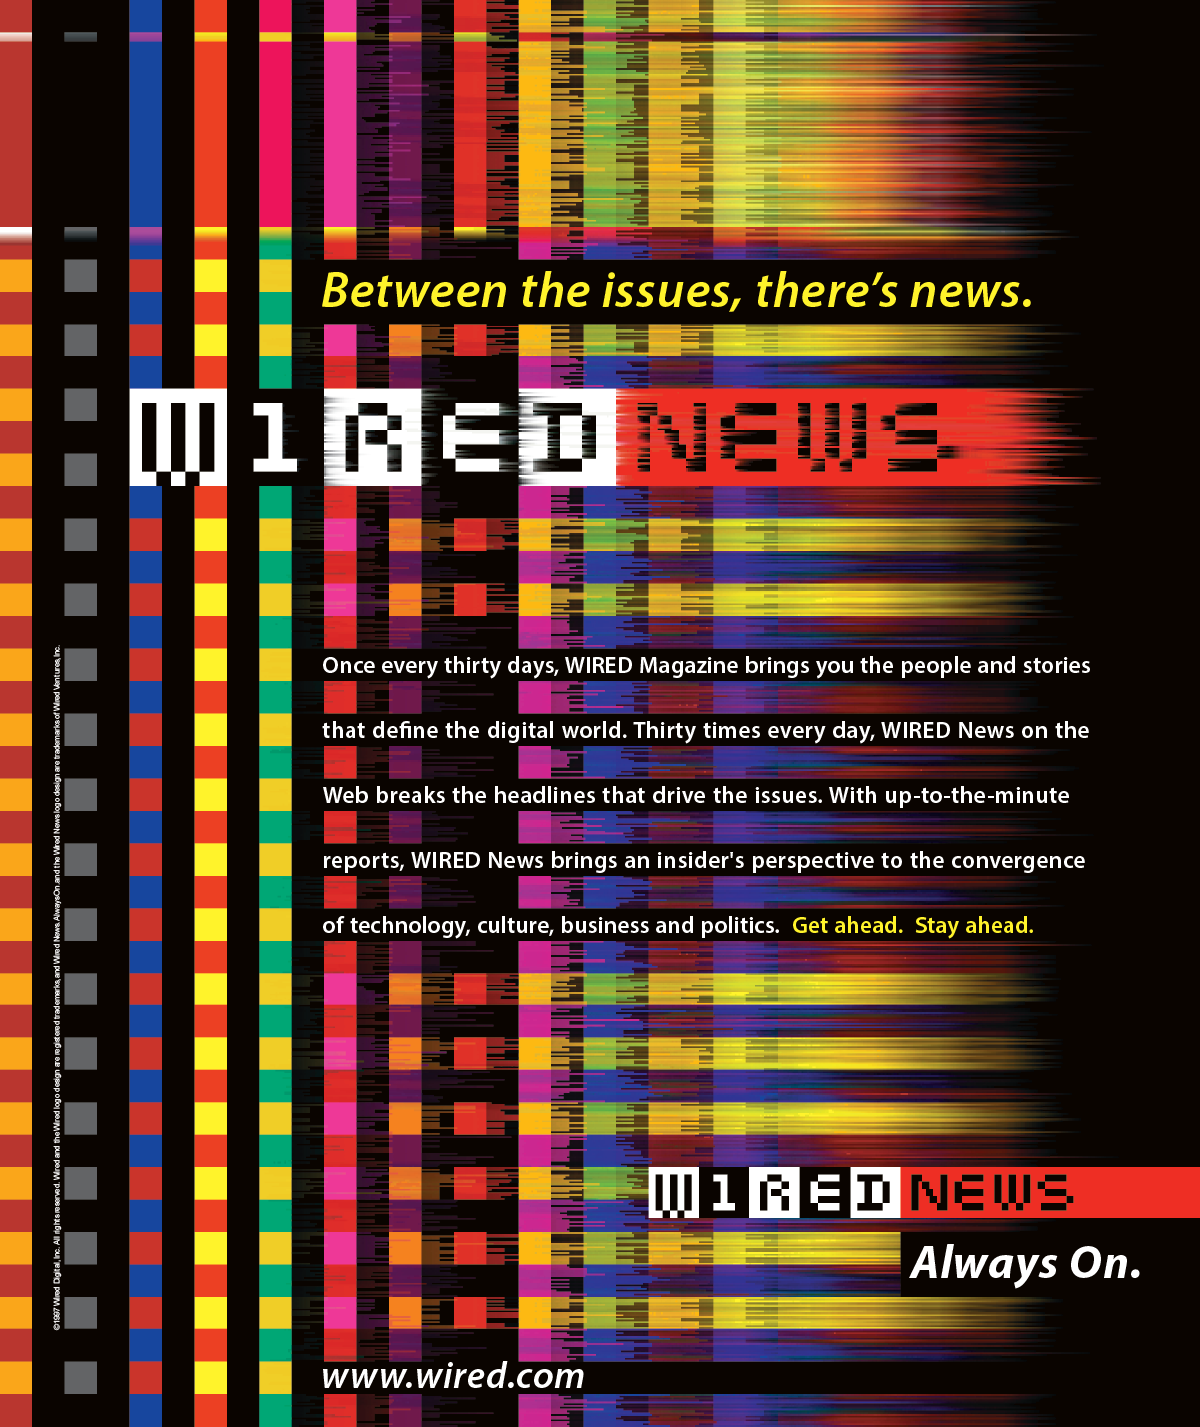 Wired News ad